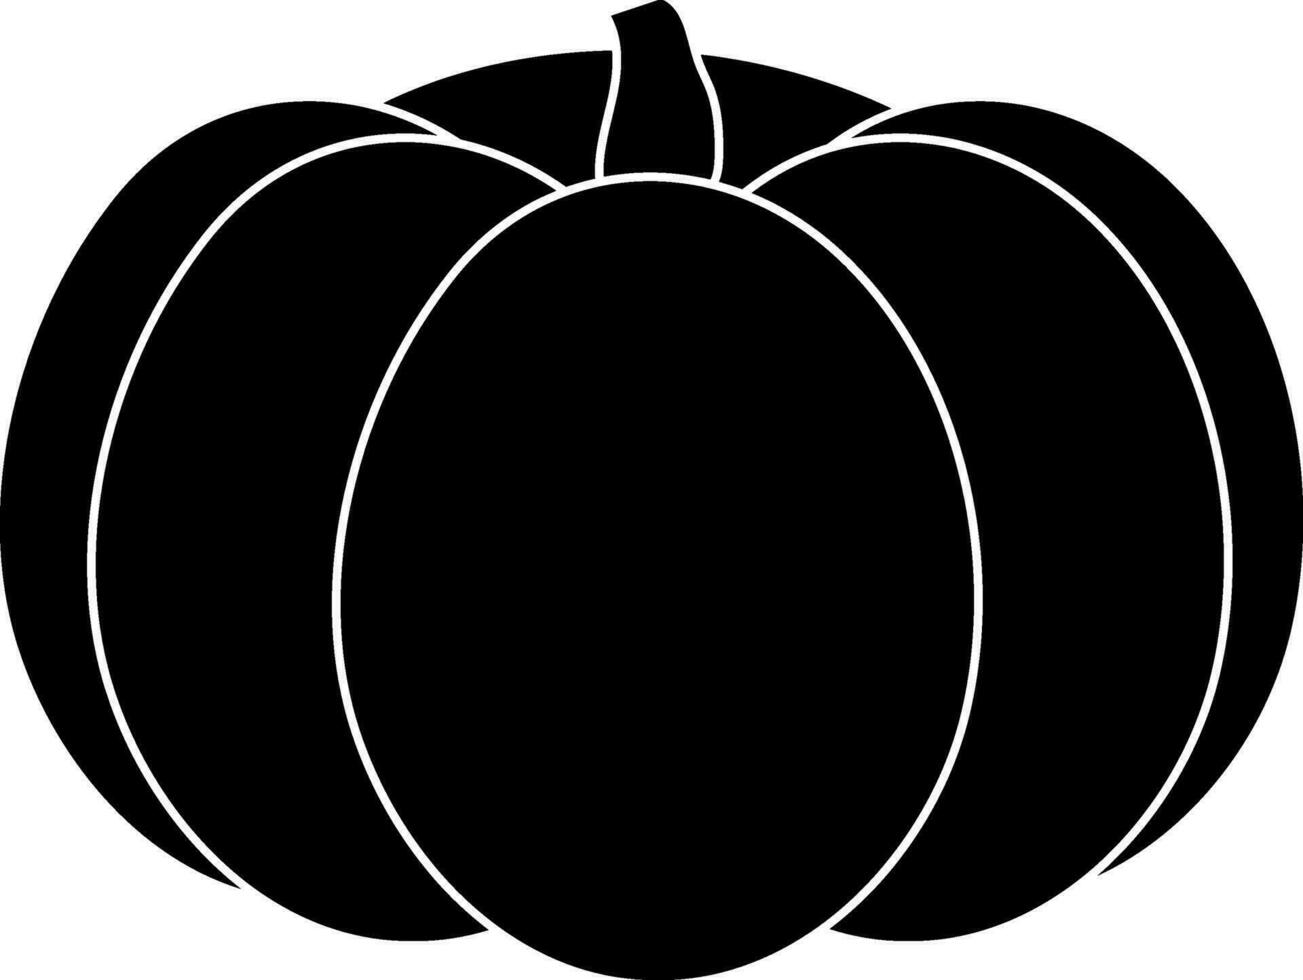 Pumpkin icon in glyph style for agriculture. vector